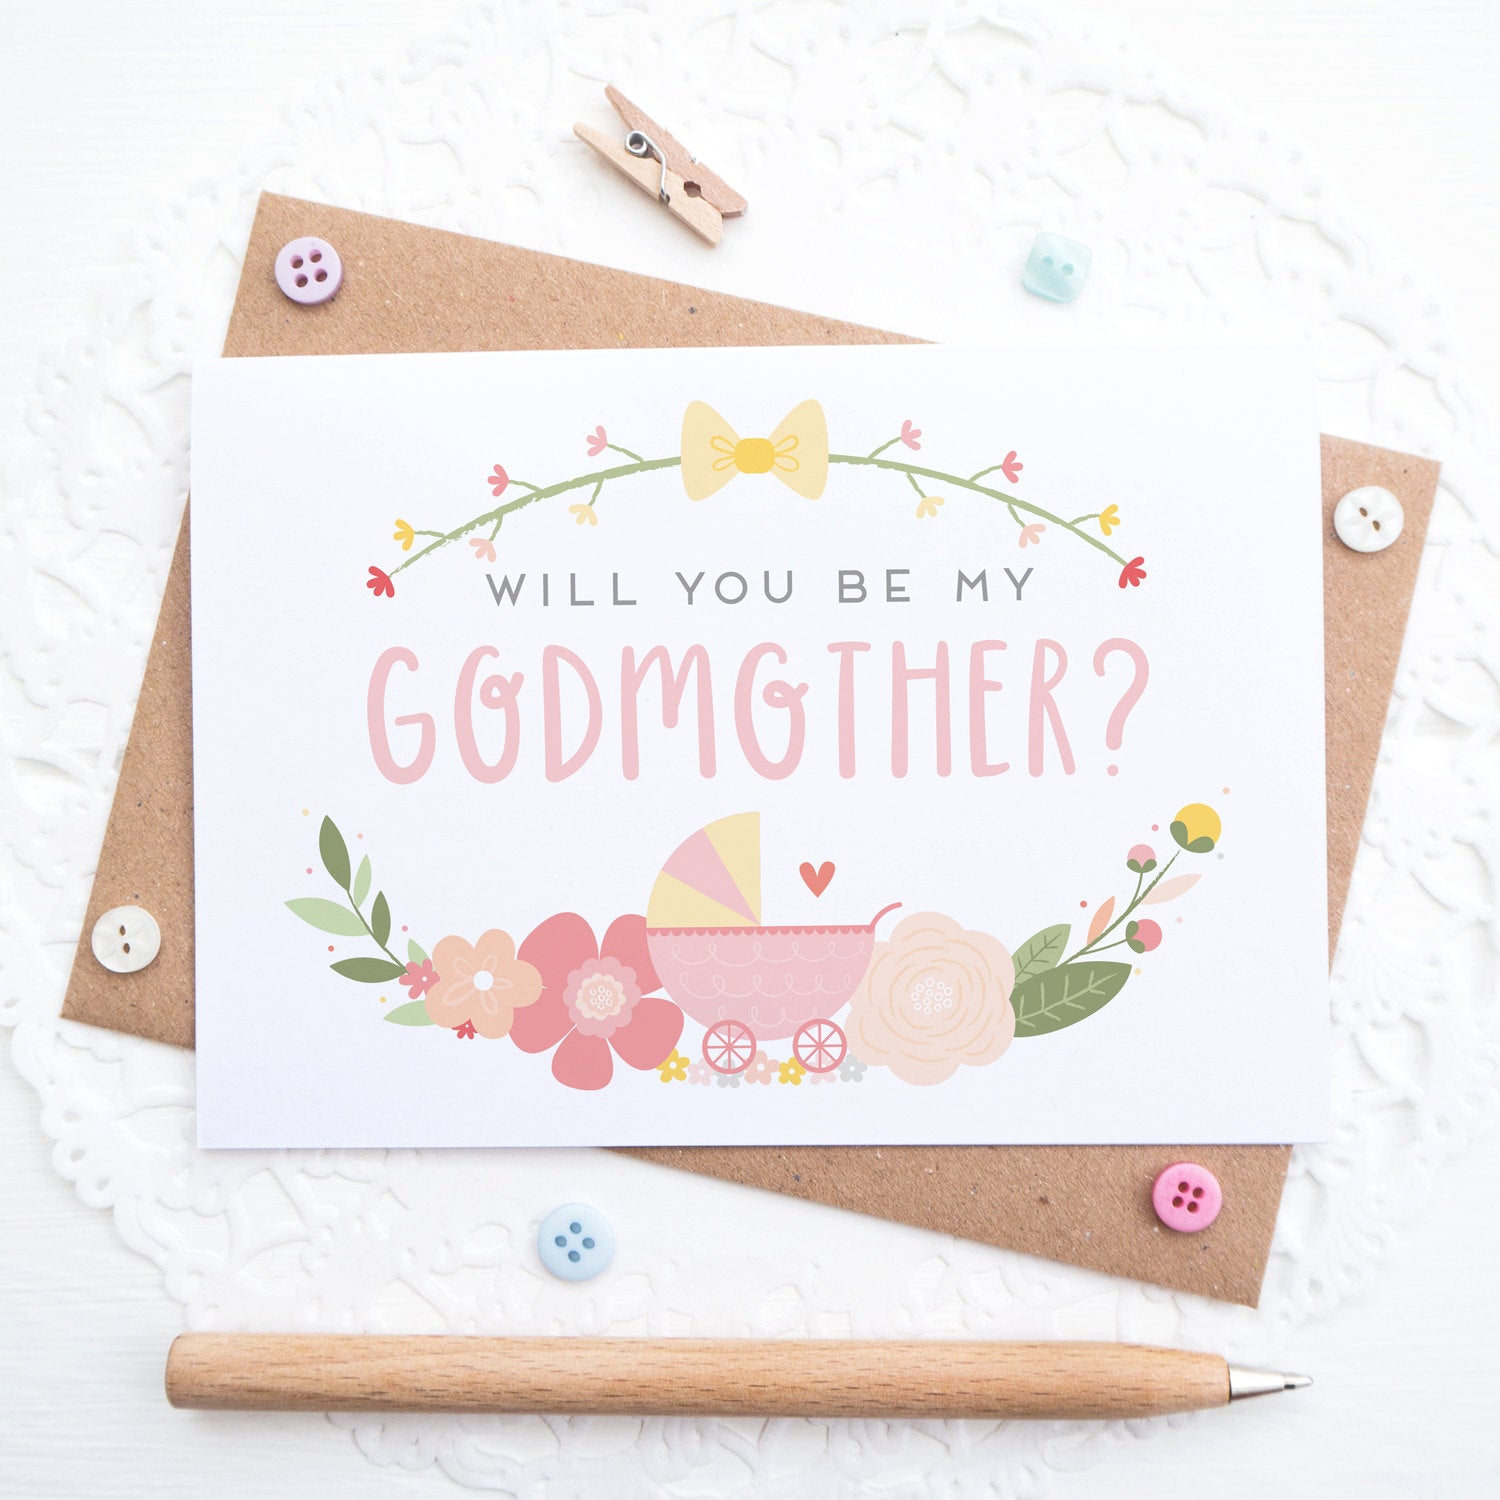 Will you be my Godmother card in pink